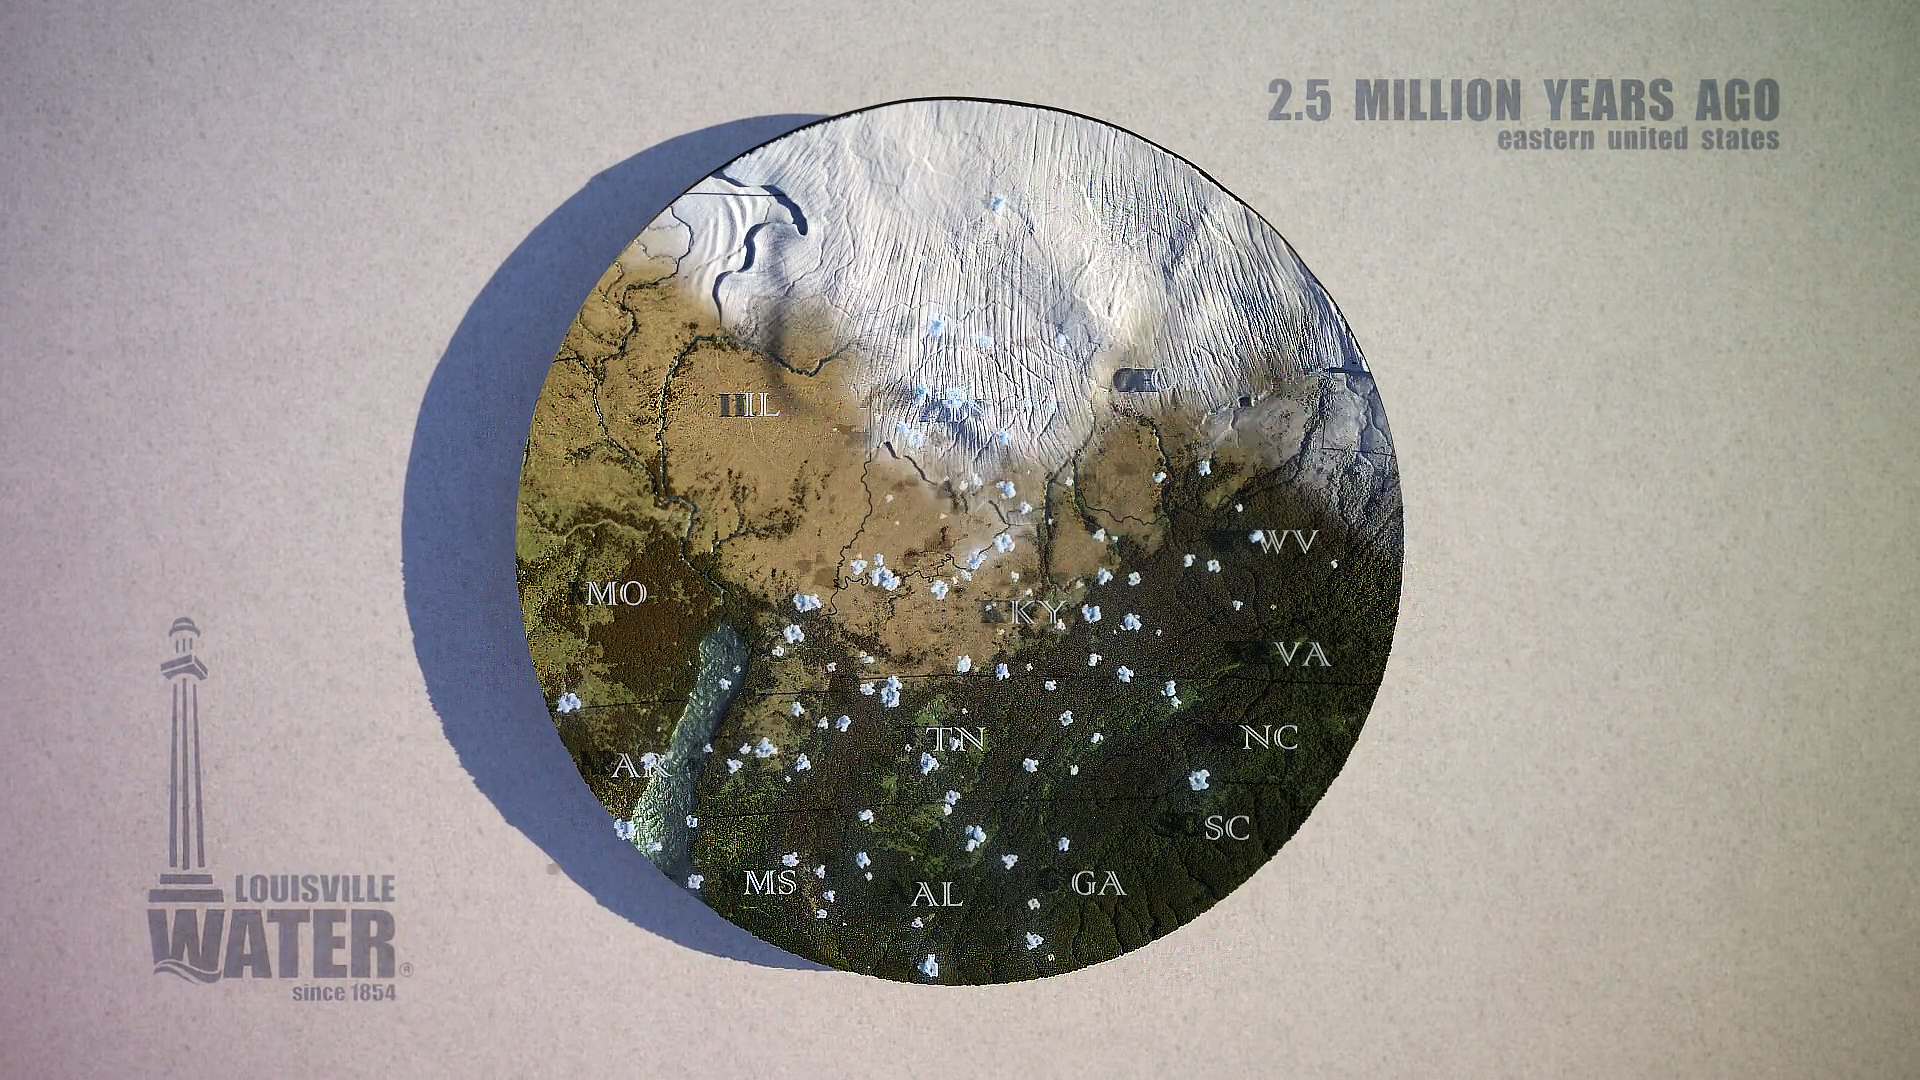 This 3D rendered image from a PR movie displays a circular chunk of land that represents the City of Louisville's region. Half of the land is being engulfed by glaciers it is demonstrating what occurred over 2.5 million years ago.